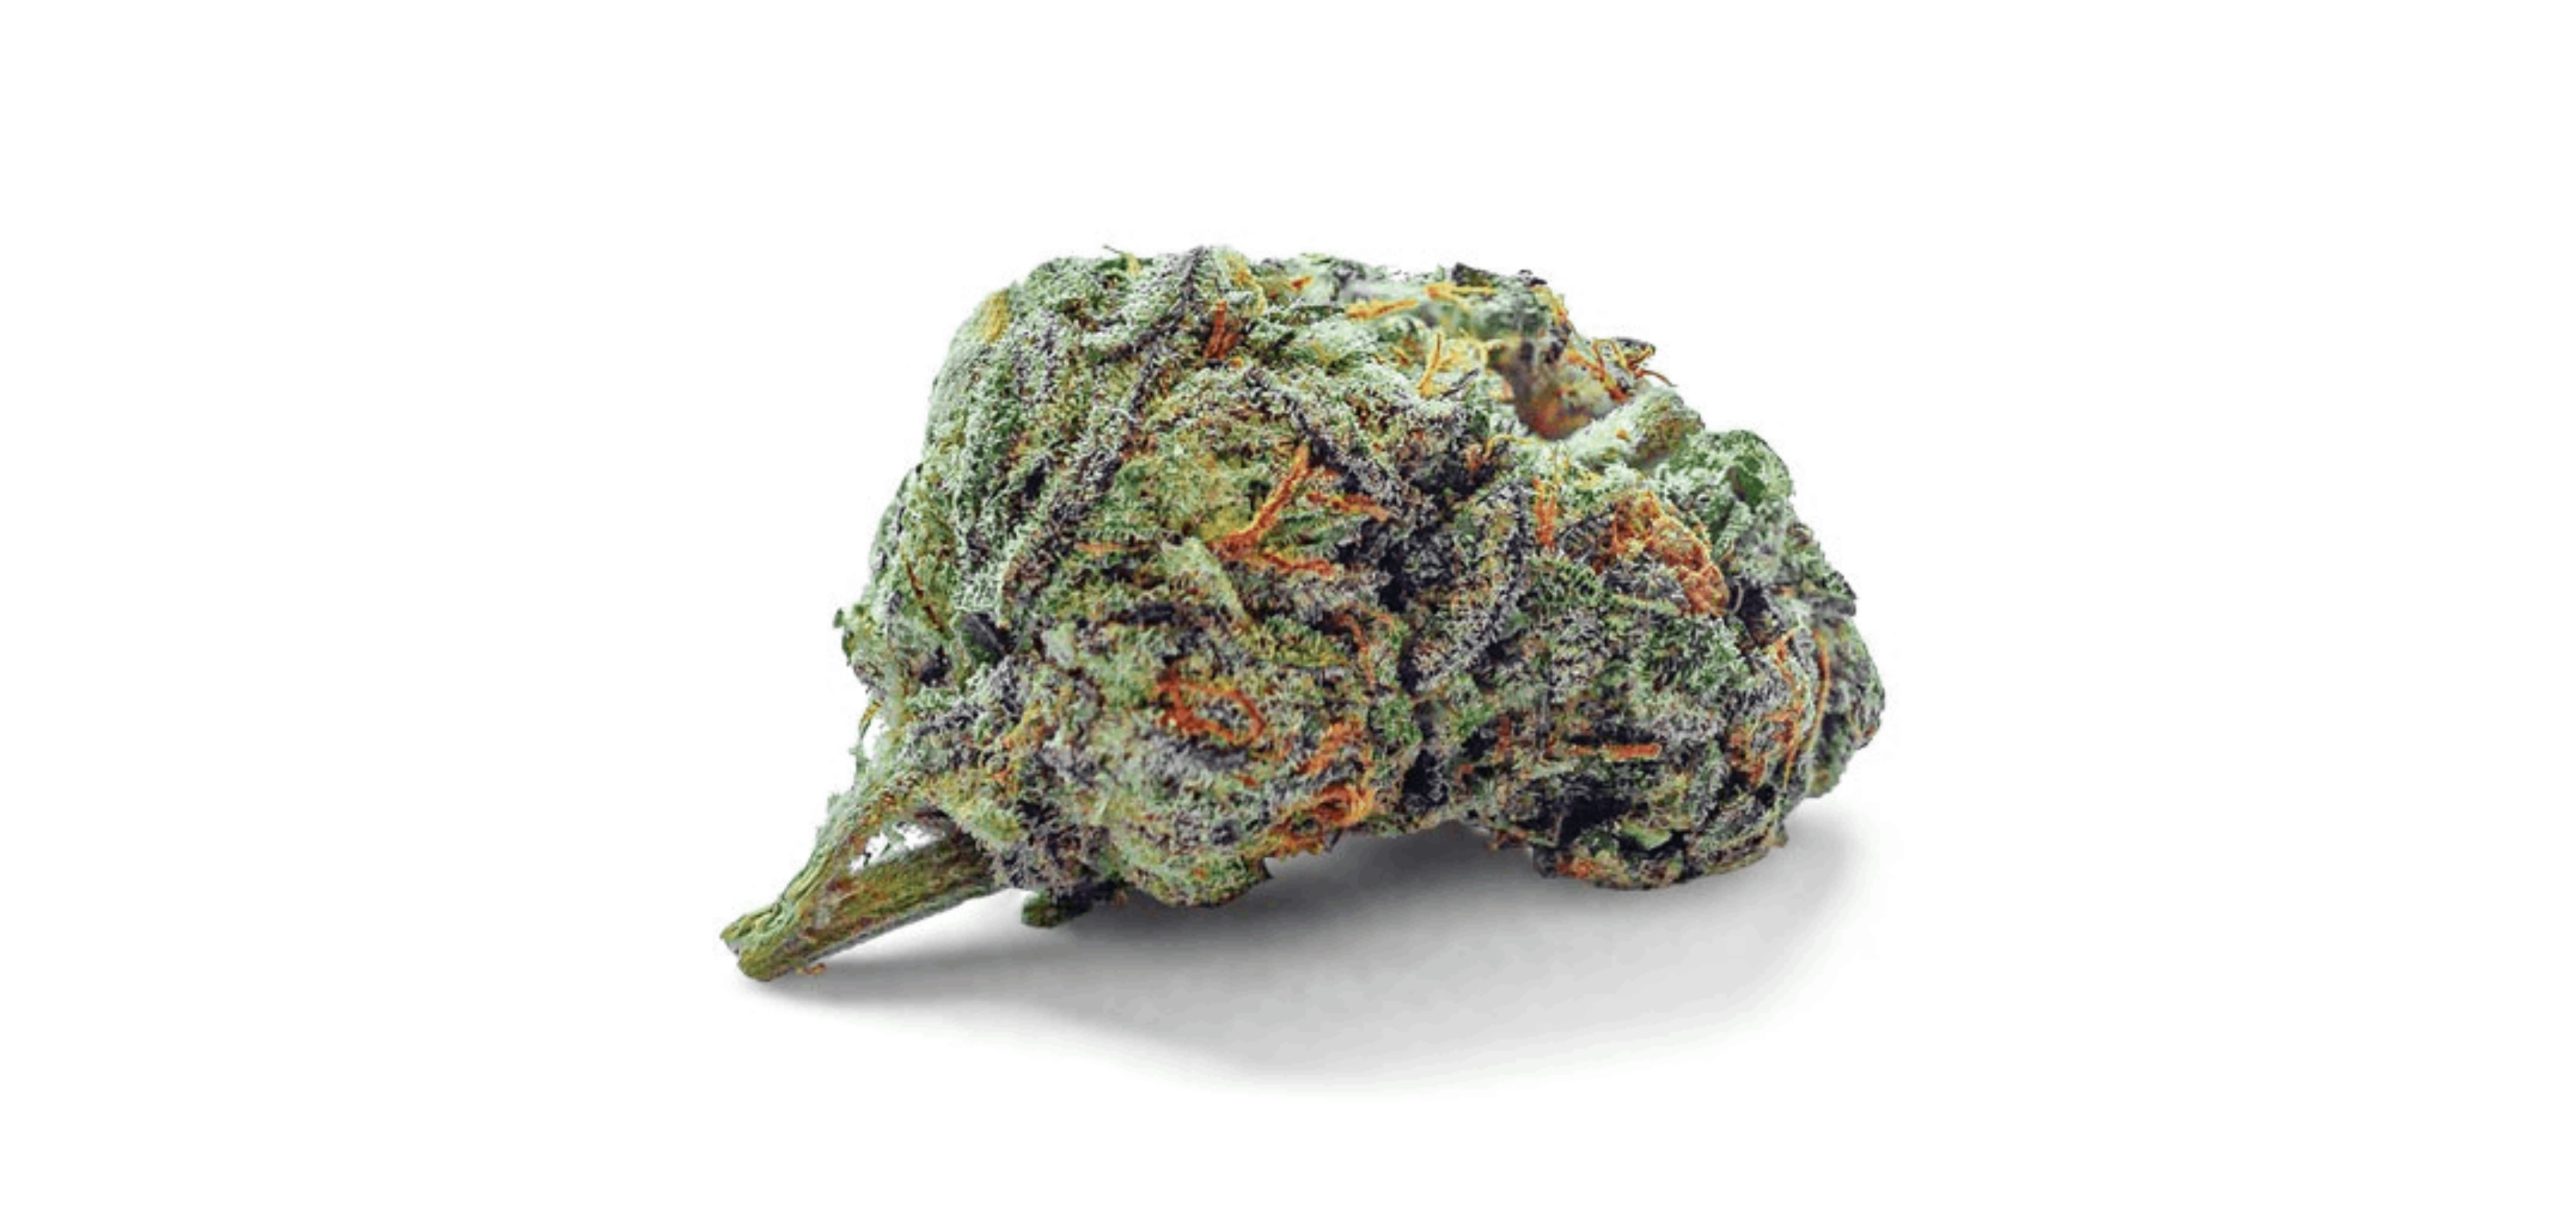 Fruity Pebbles is an almost evenly balanced hybrid that leans slightly on the Indica side, with a genetic makeup of 55 percent Indica and 45 percent Sativa. 